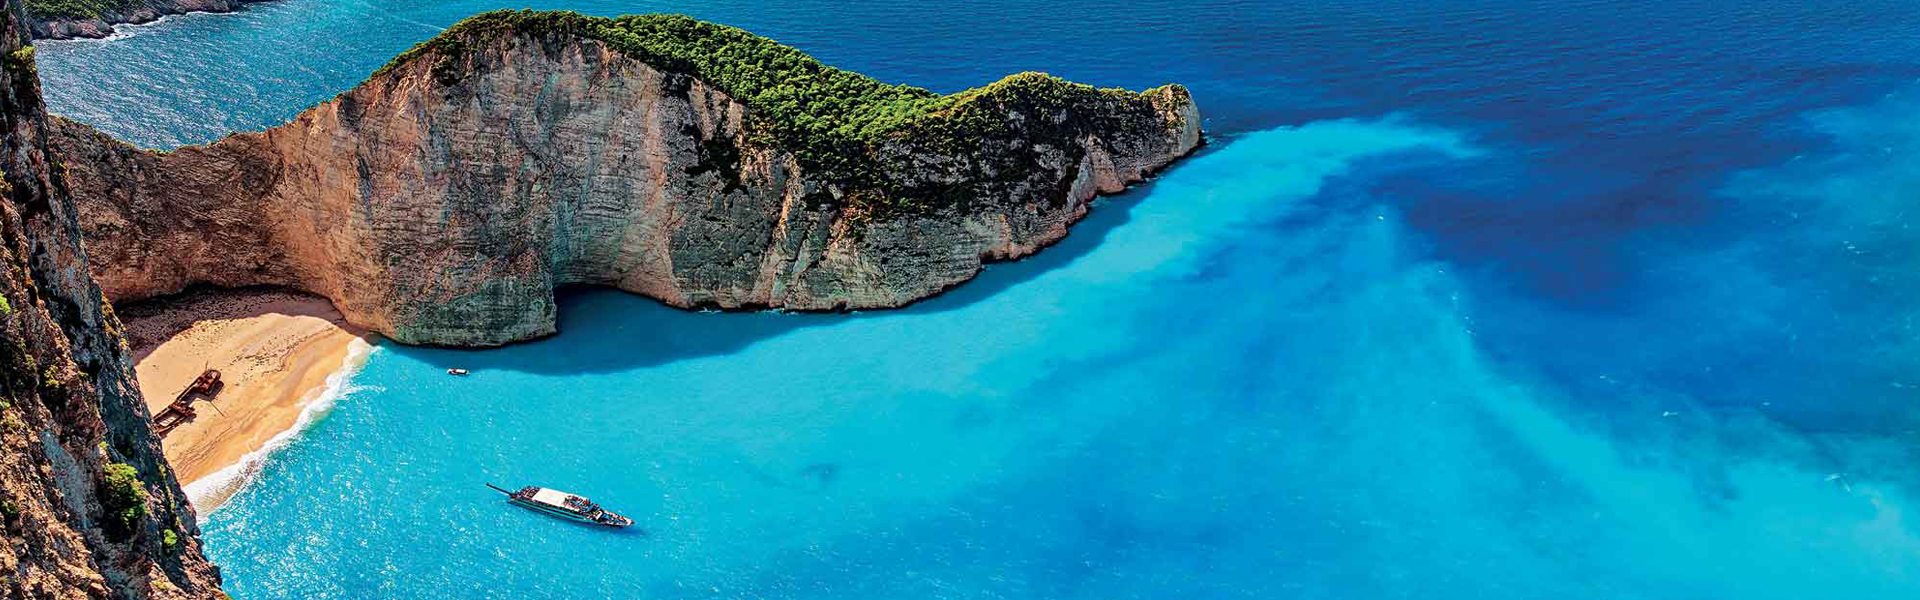 Sail through the idyllic landscapes of the Mediterranean Sea and Greek Islands 